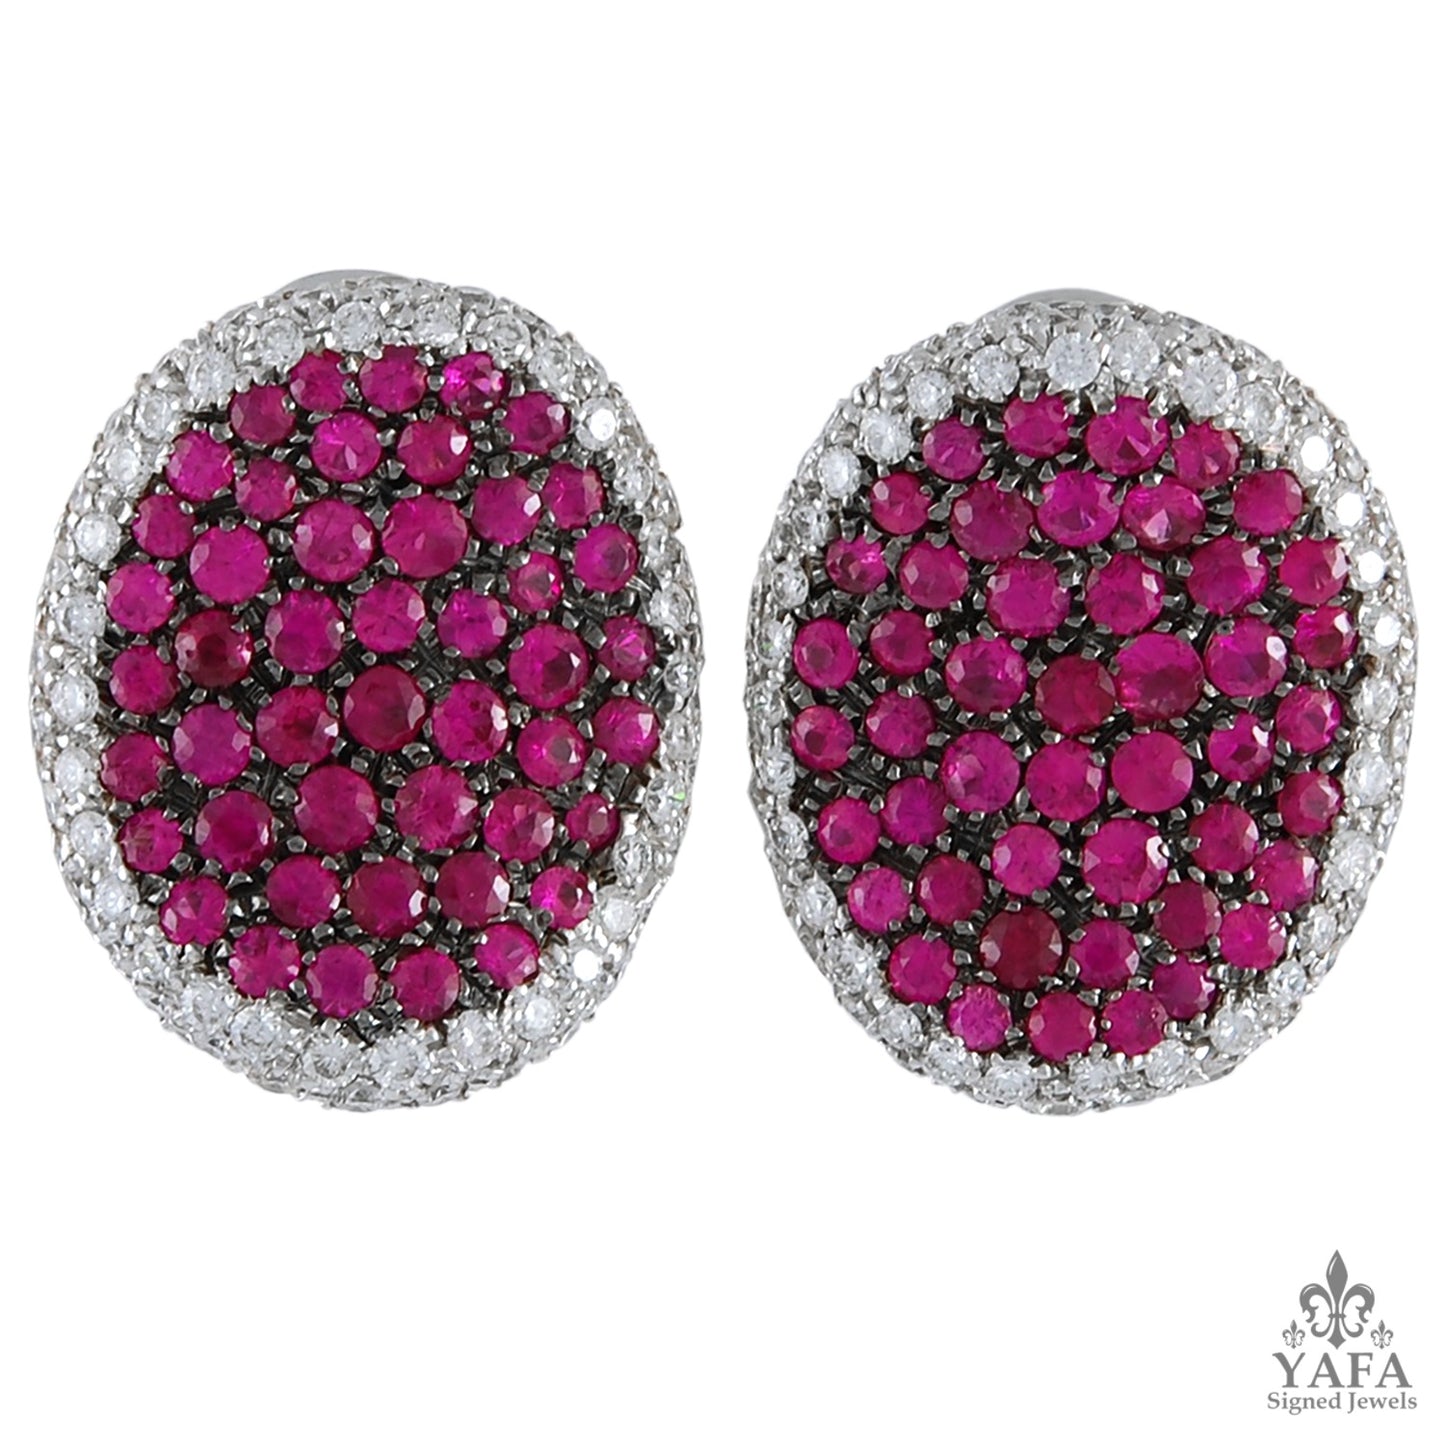 A Pair of Diamond and Pink Sapphire Earrings